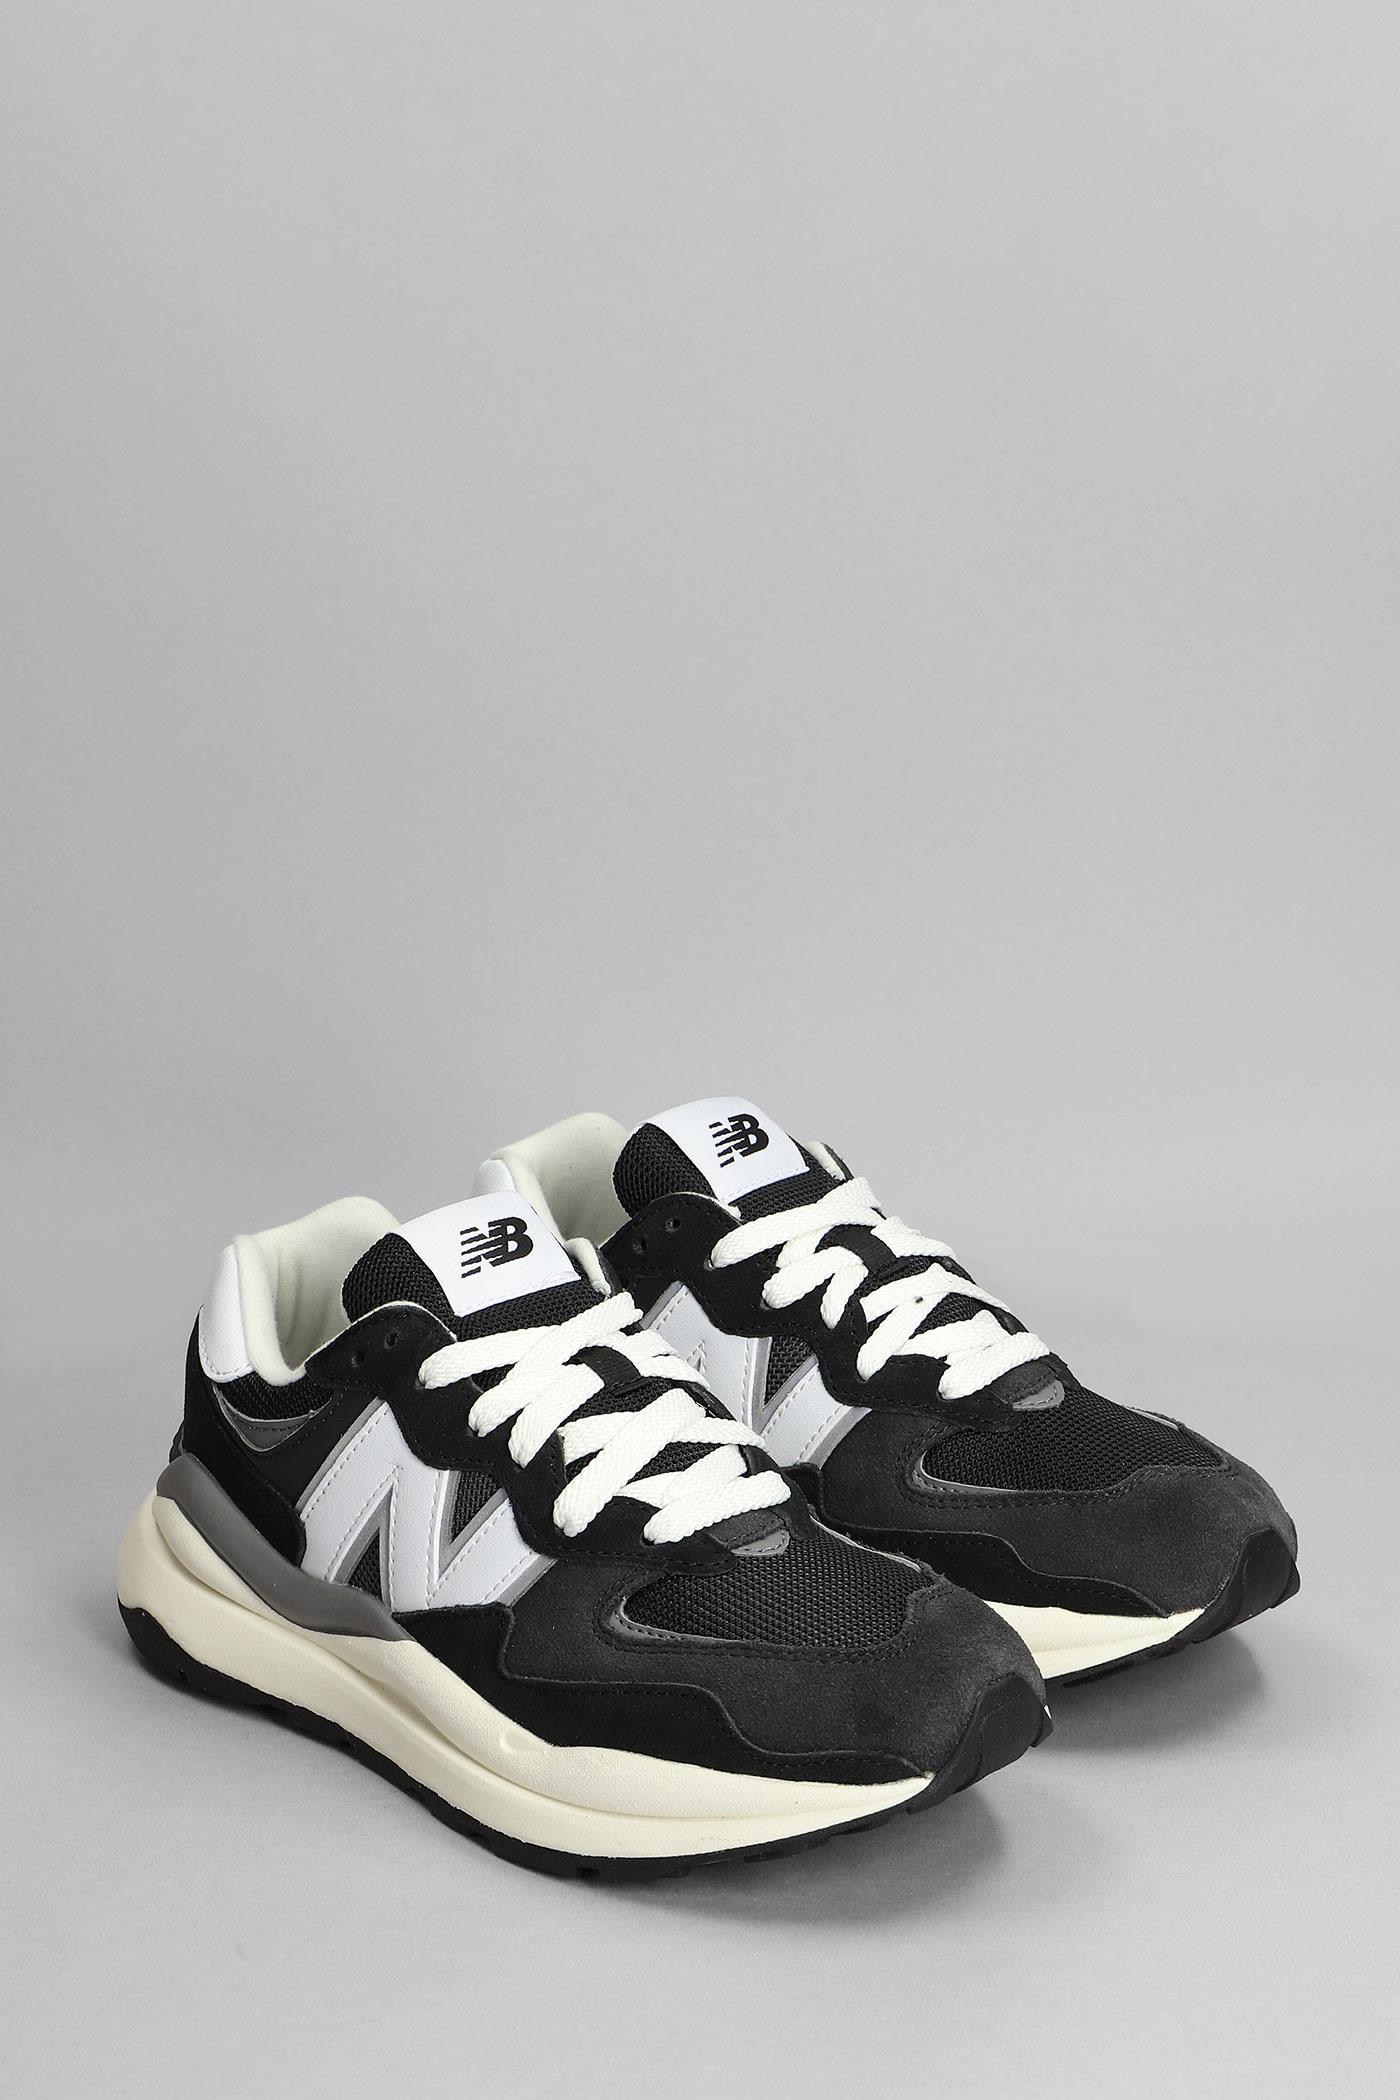 New Balance 5740 Sneakers In Black Suede And Fabric | Lyst